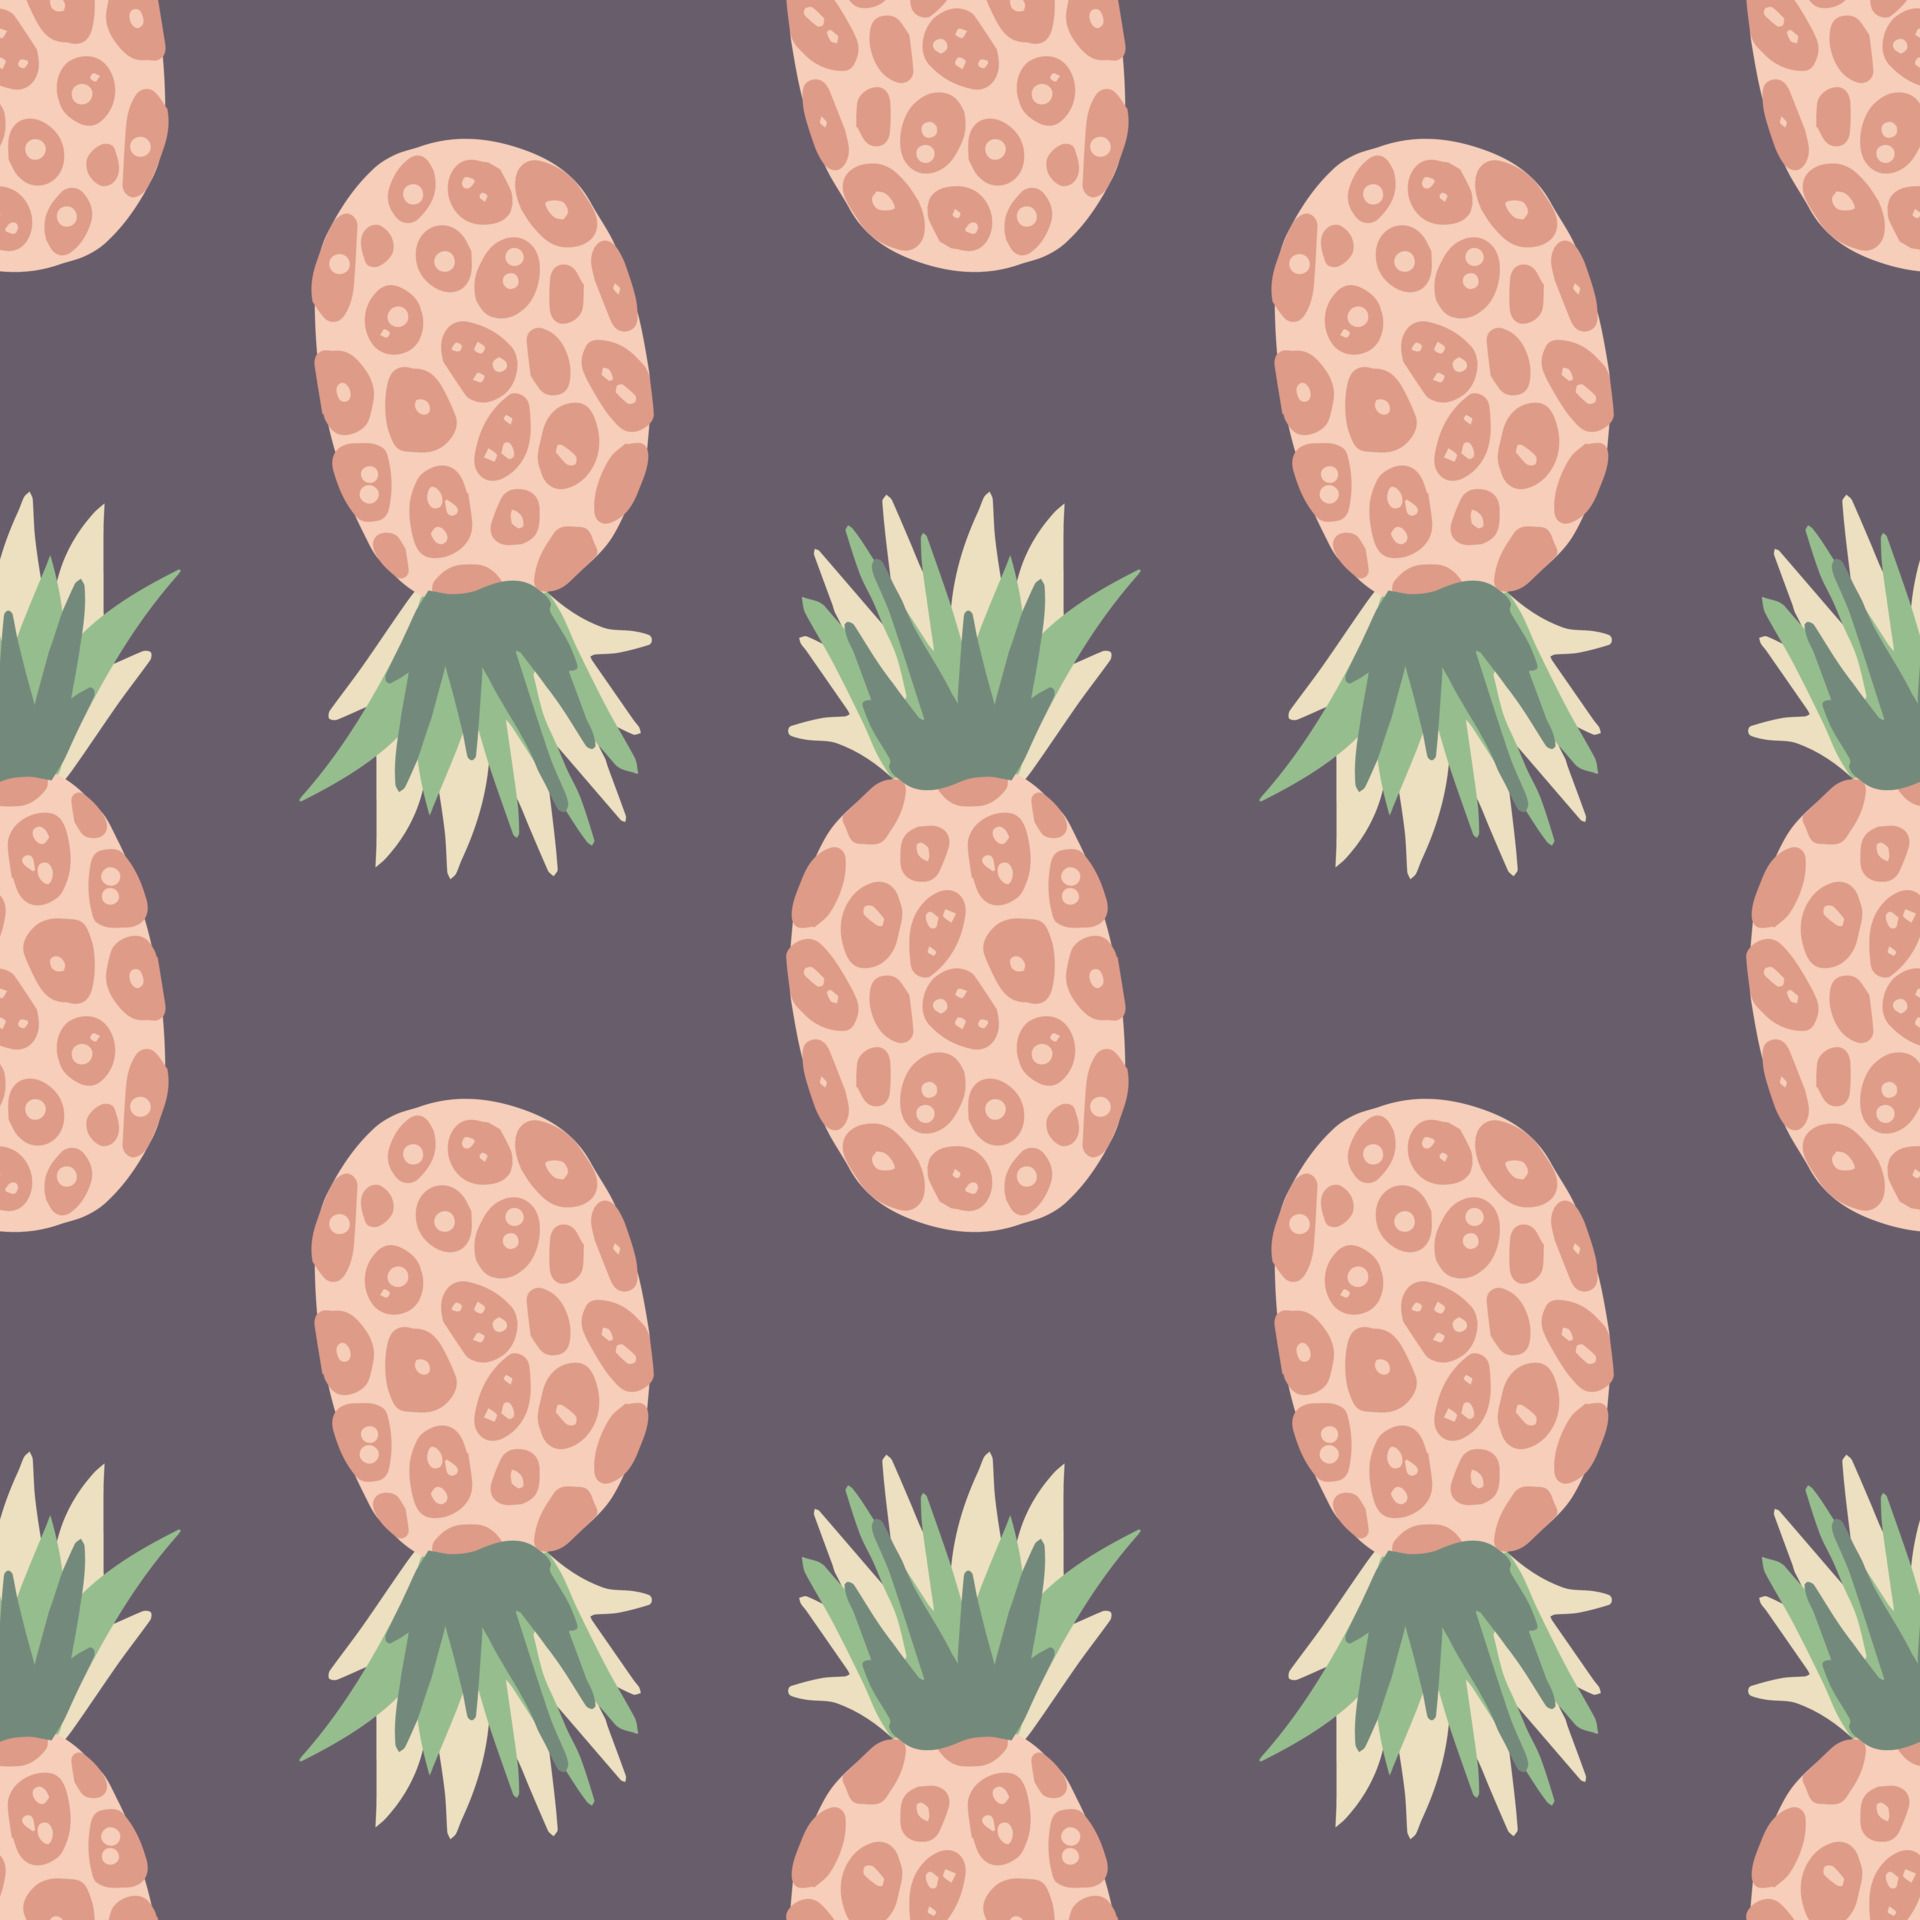 A pineapple pattern in a muted pink and green color scheme on a dark purple background - Pineapple